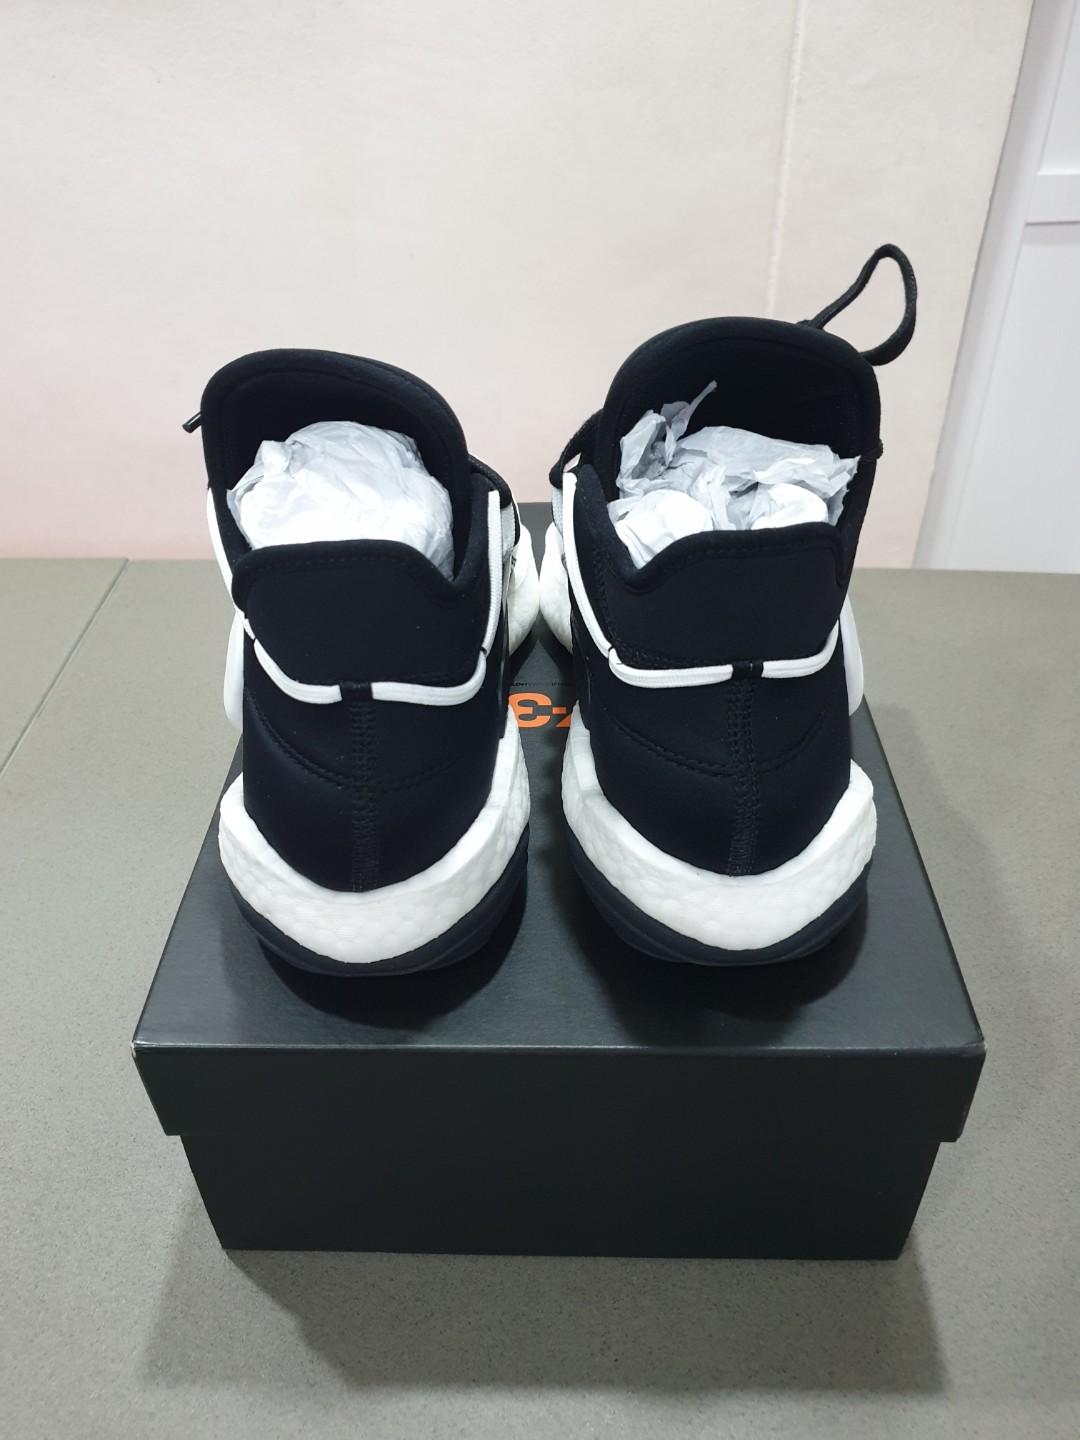 Clearance)Adidas Y3 Y-3 James Harden Byw Bball Black/White, Men'S Fashion,  Footwear, Sneakers On Carousell